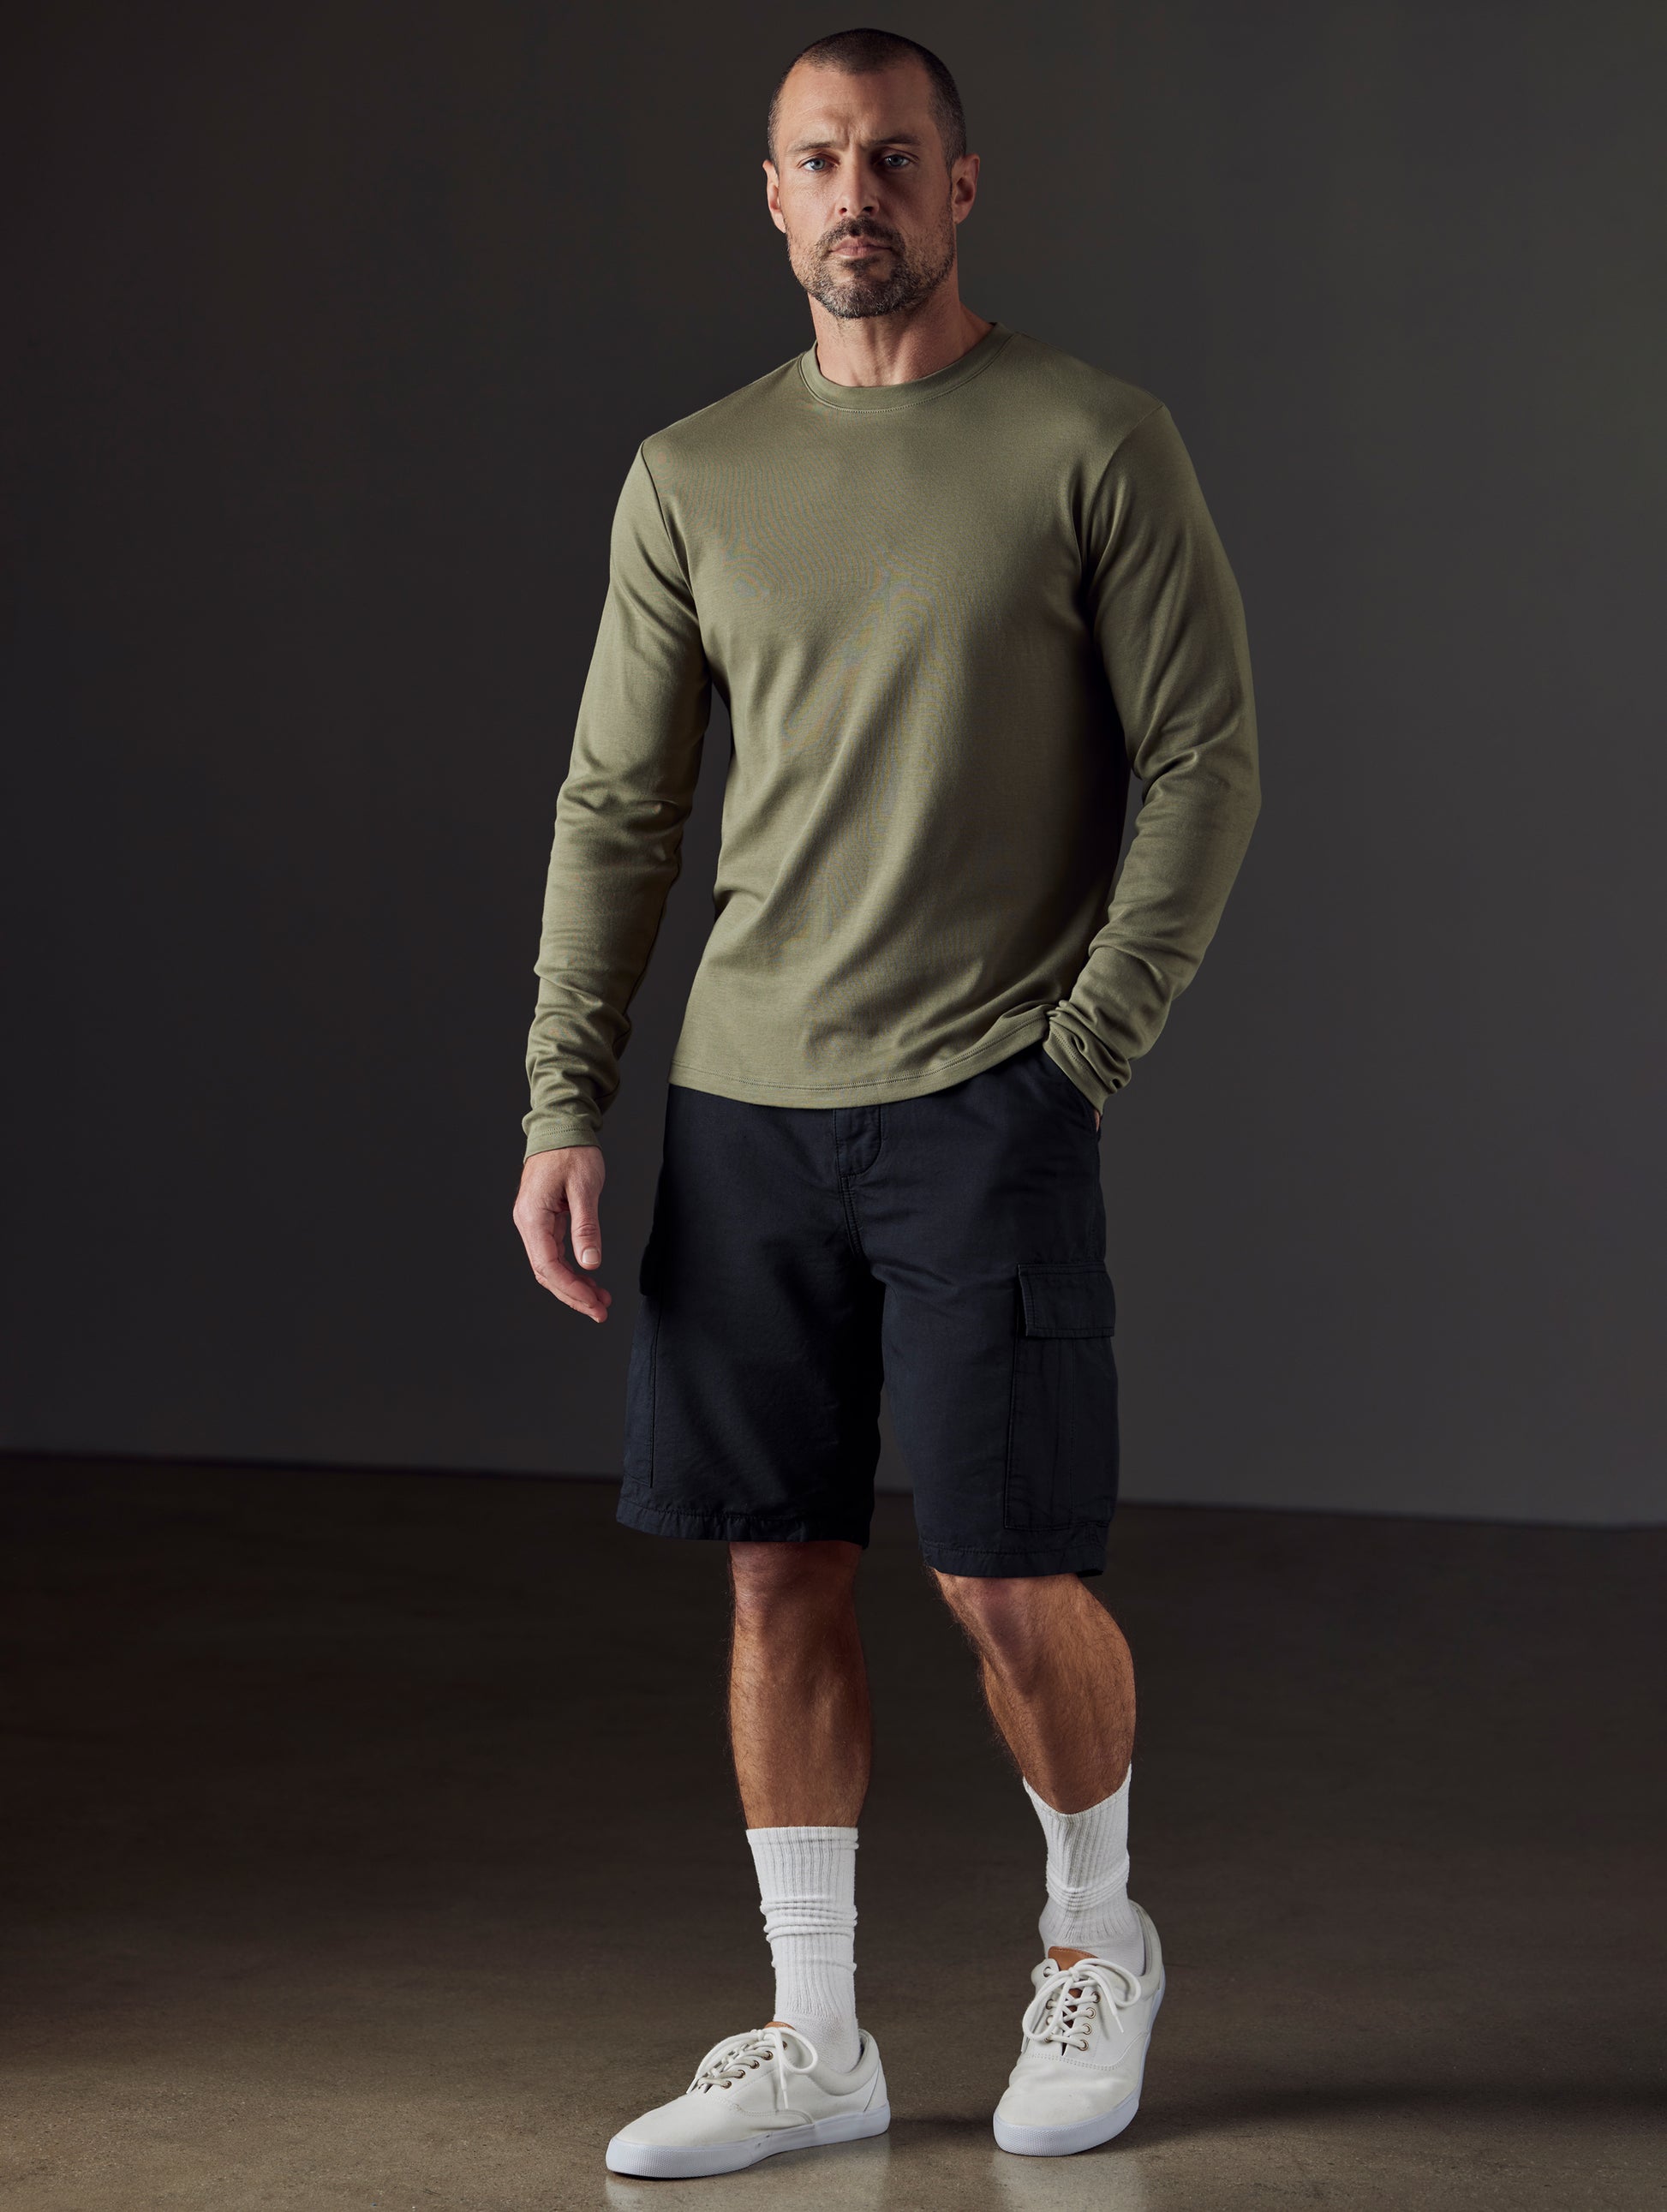 man wearing black fatigue shorts from AETHER Apparel